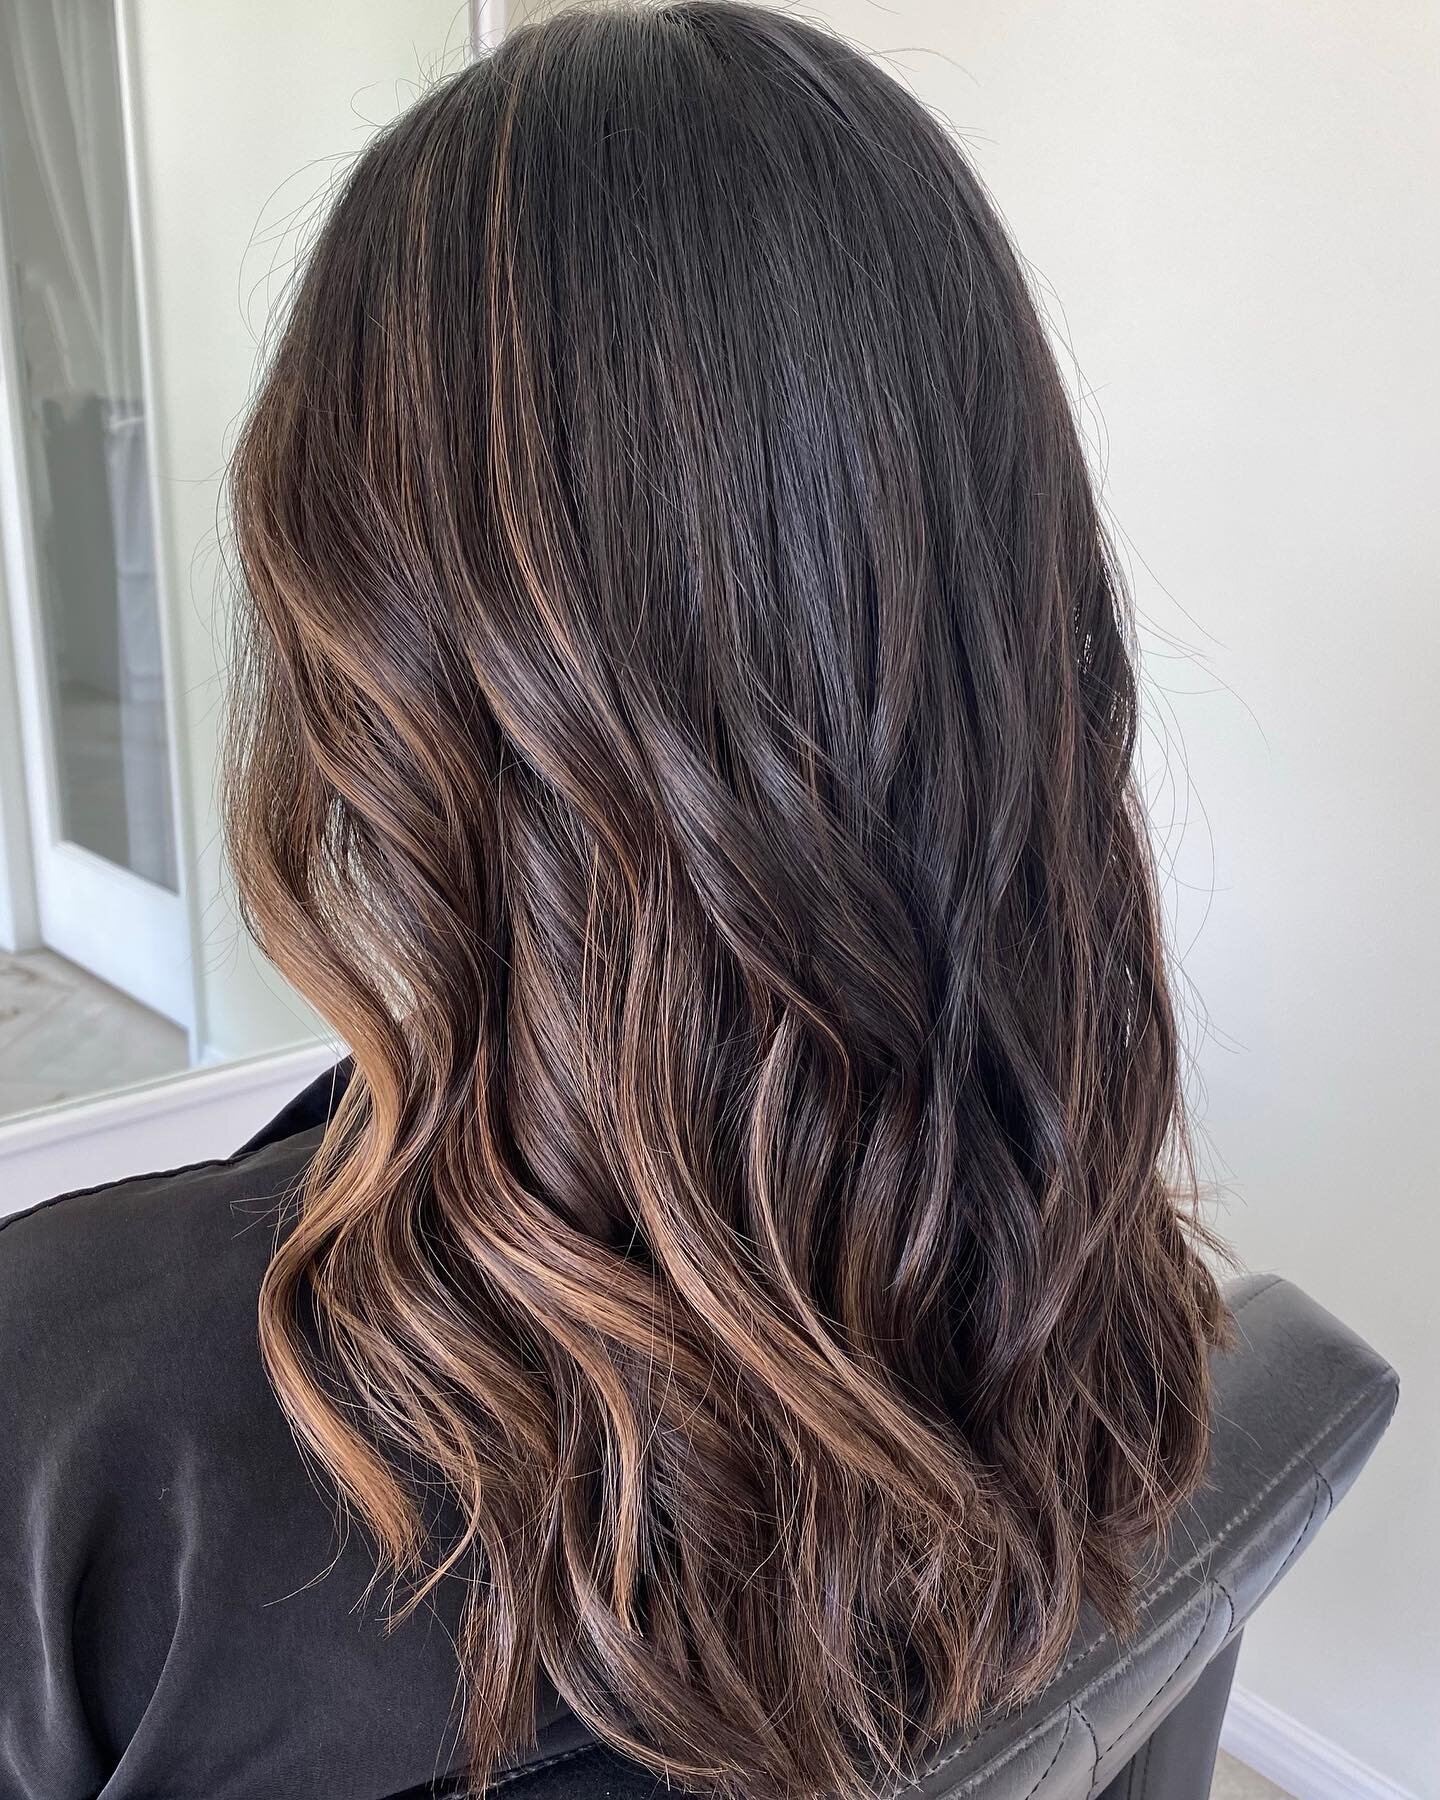 Color reset 

Color correction with balancing tones and highlight placement for low maintenance upkeep, swipe for before

#colorcorrection #colorchange #asianhighlights #asianhair